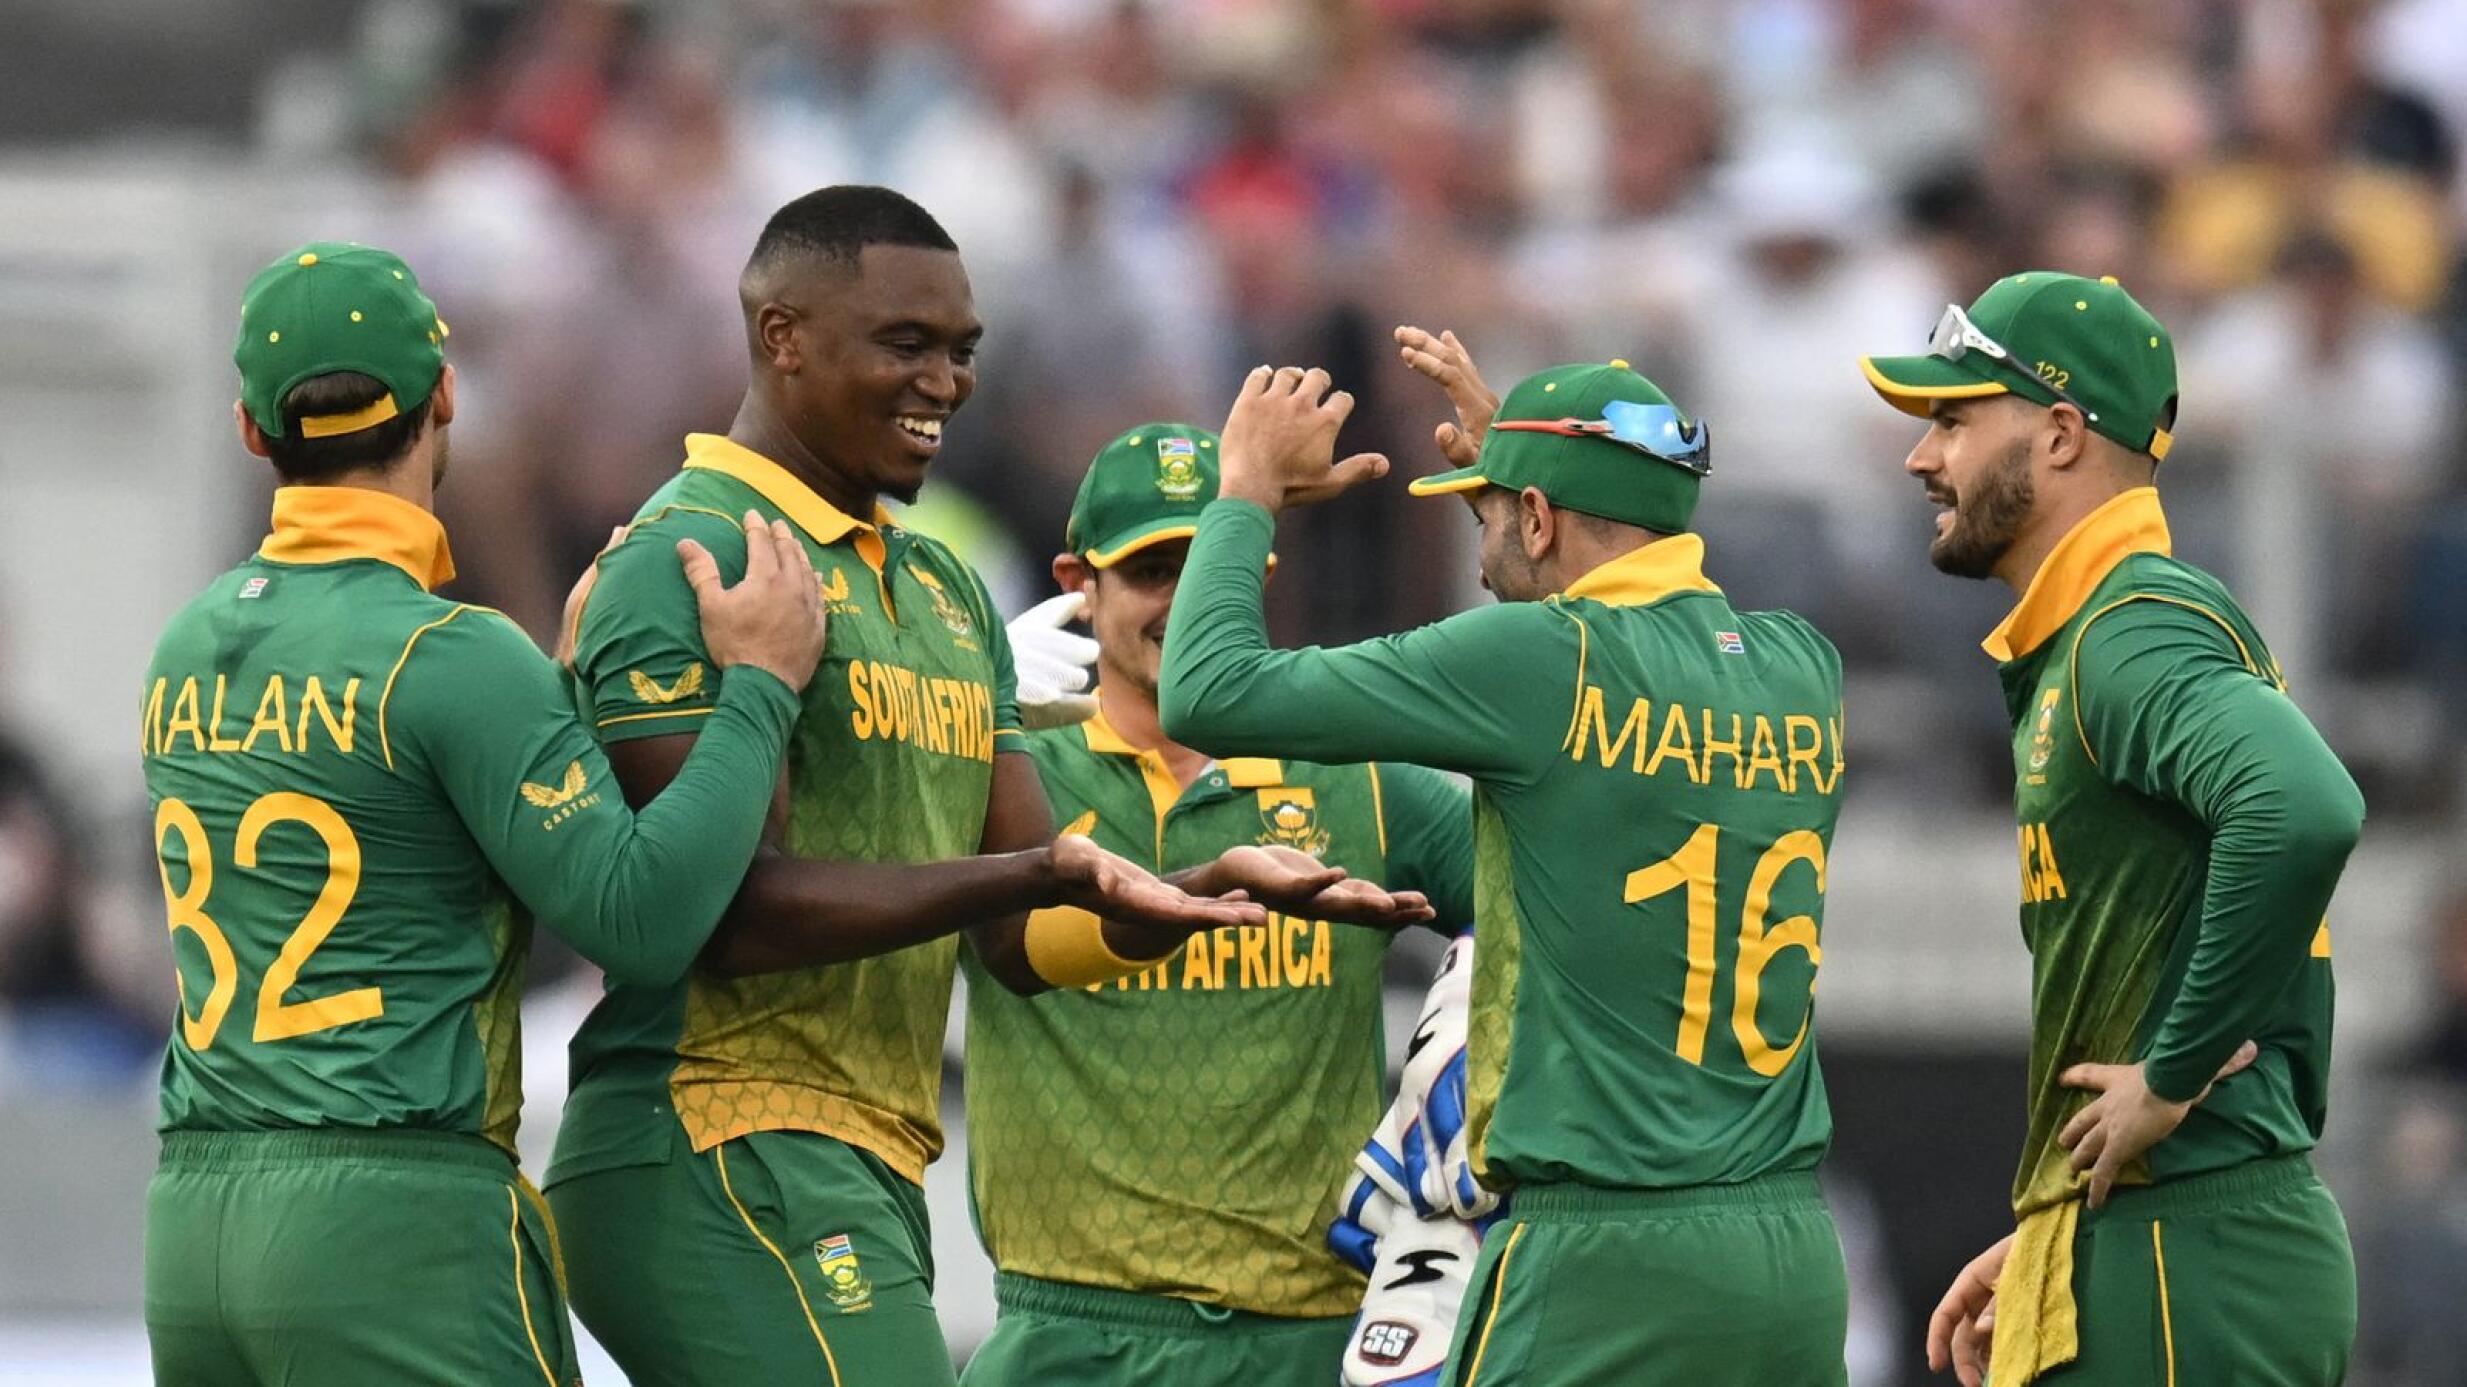 South Africa's Lungi Ngidi celebrates with teammates after taking the wicket of England's Liam Livingston during the first One Day International at the Riverside cricket ground in Durham on Tuesday